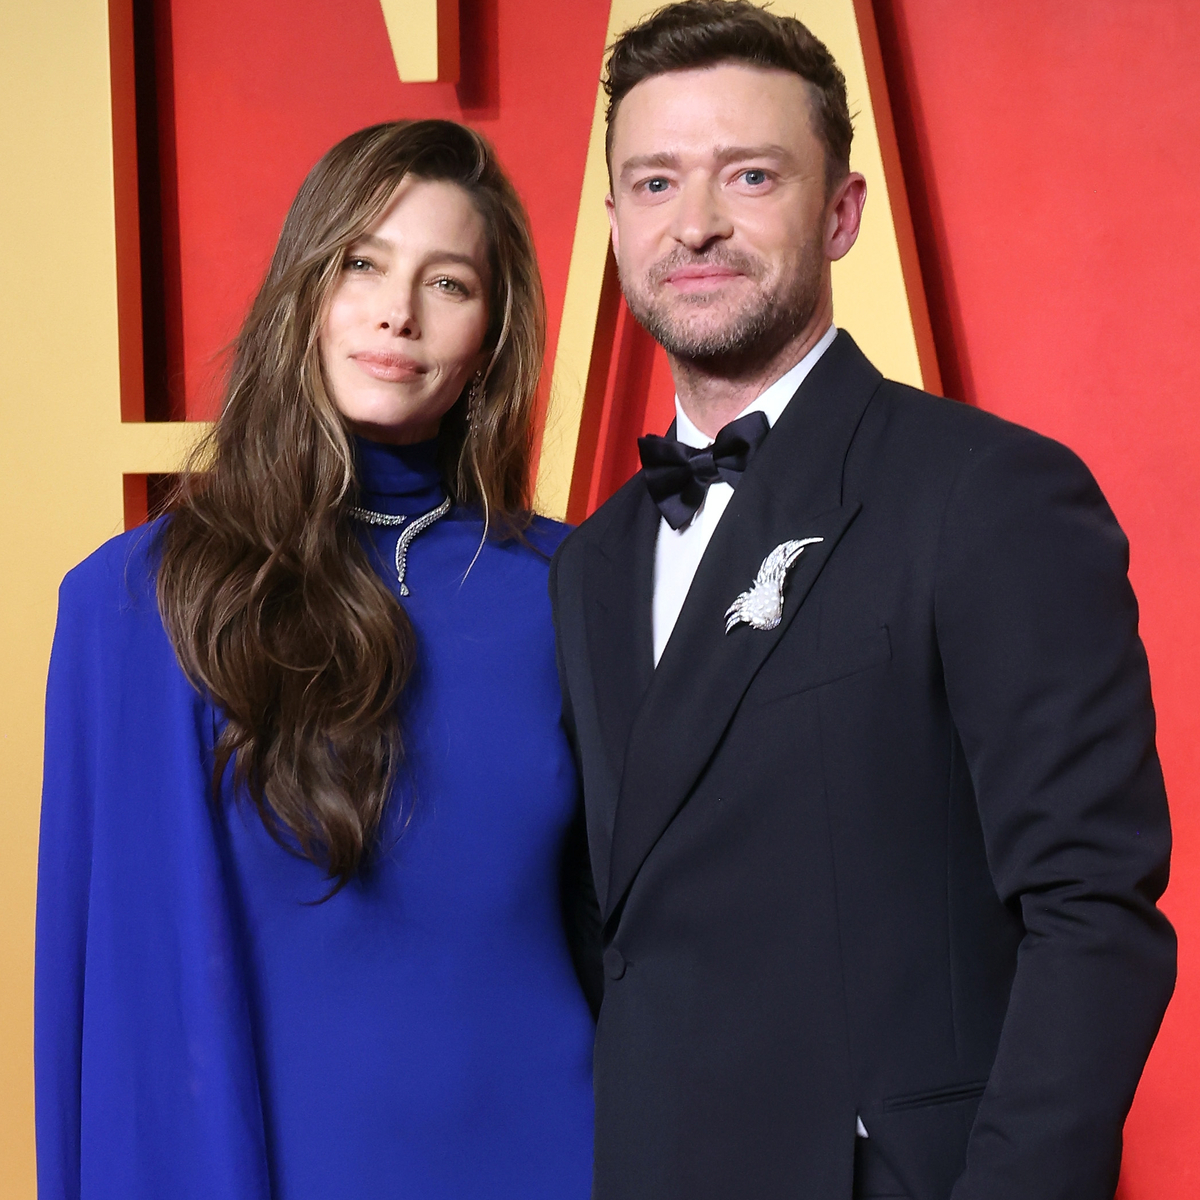 Jessica Biel Says Justin Timberlake Marriage Is a 